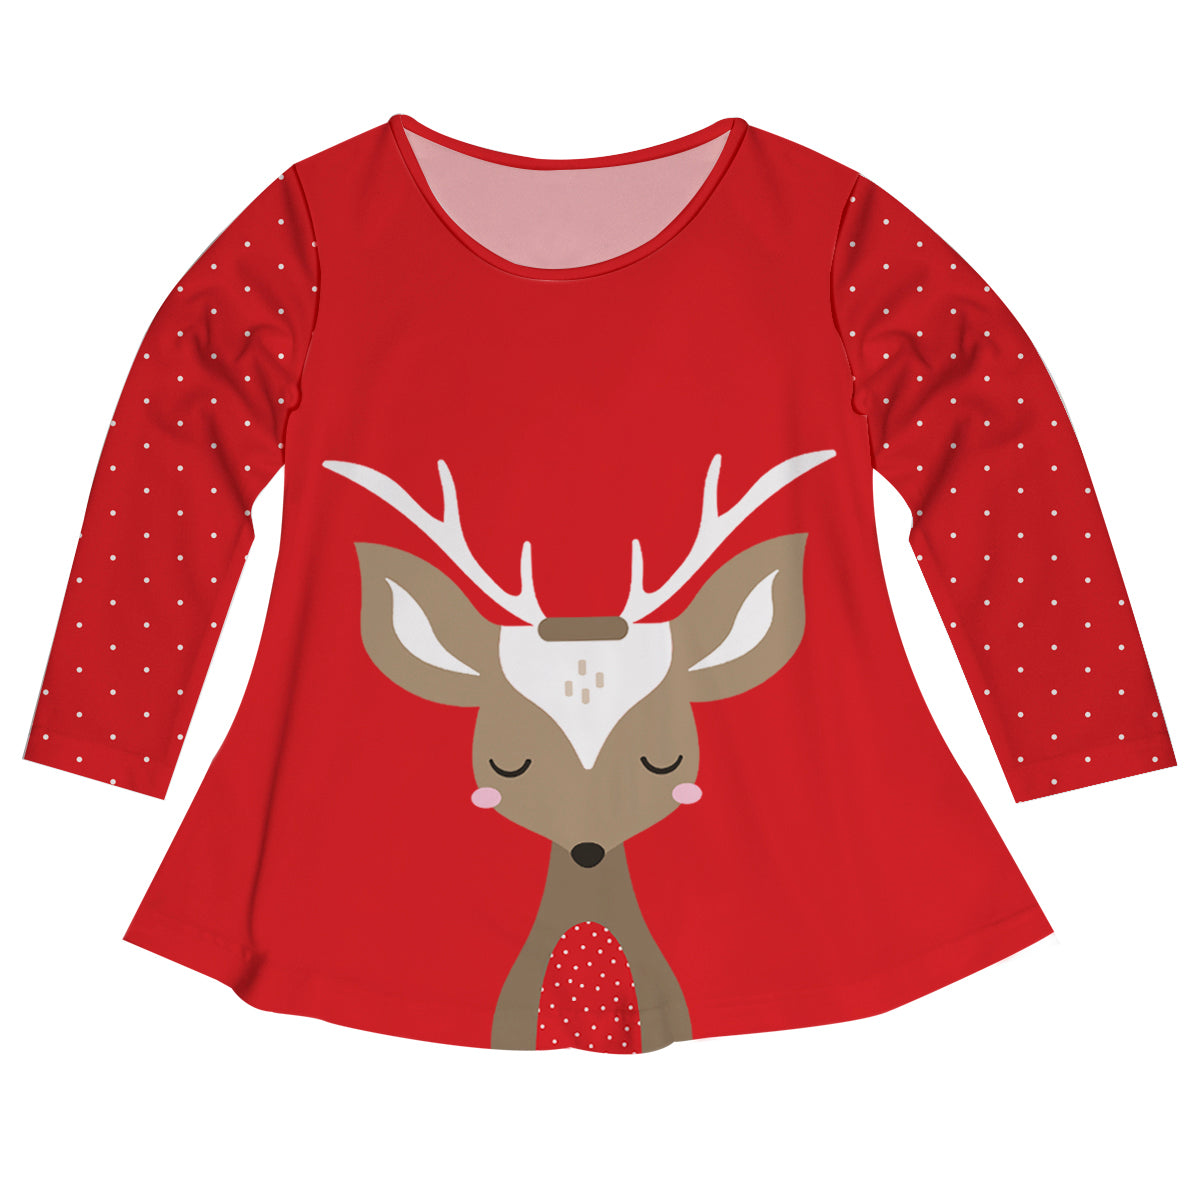 Girls red reindeer blouse with name - Wimziy&Co.